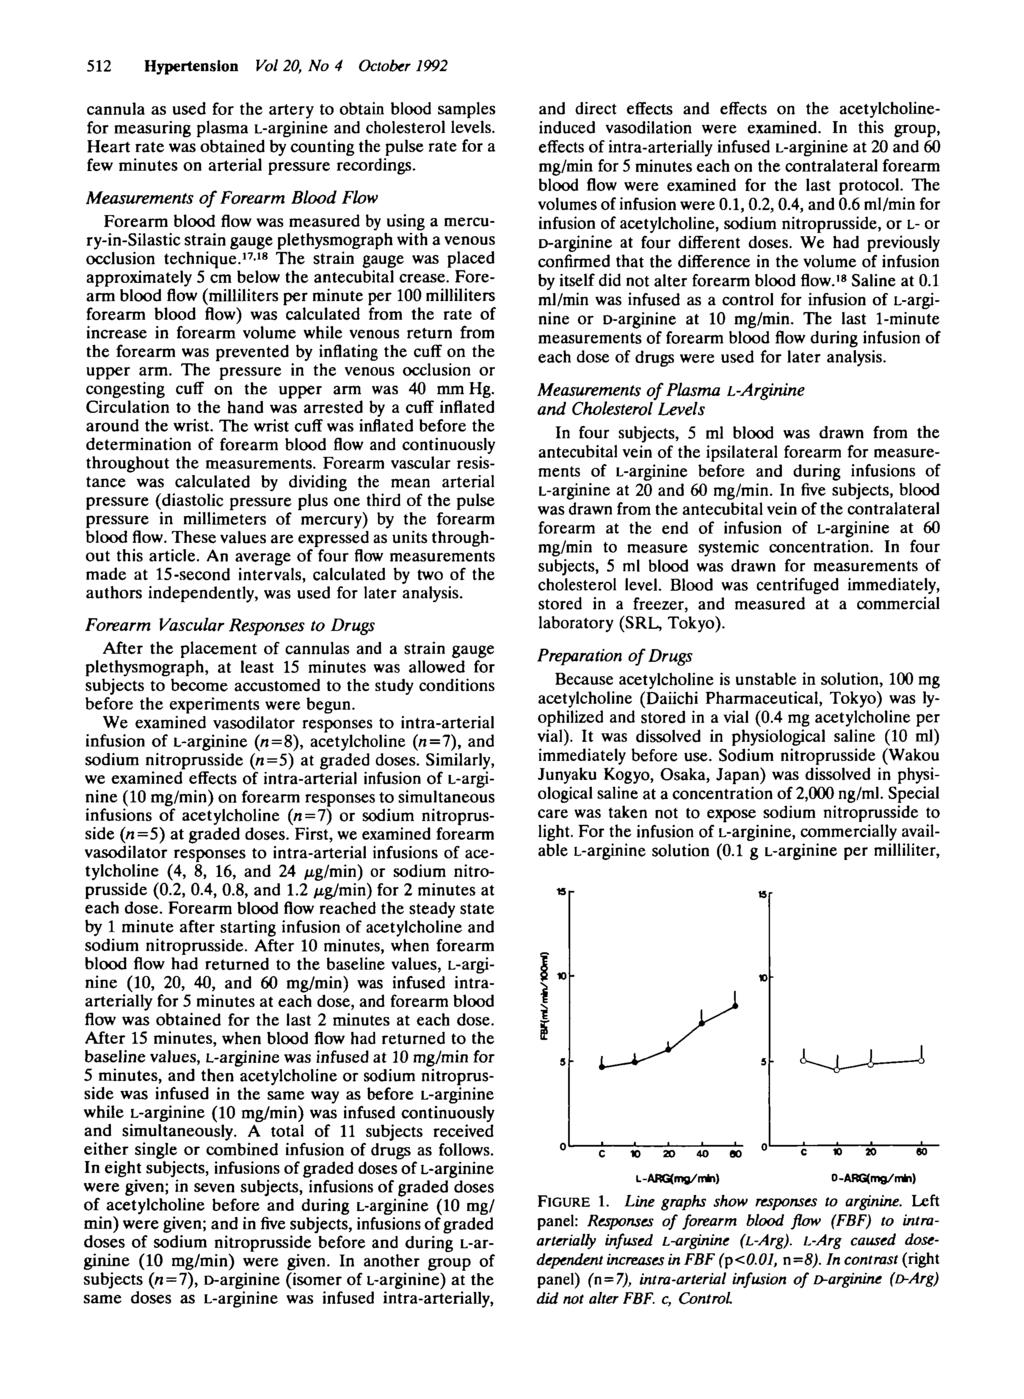 512 Hypertension Vol, No 4 October 1992 cannula as used for the artery to obtain blood samples for measuring plasma L-arginine and cholesterol levels.